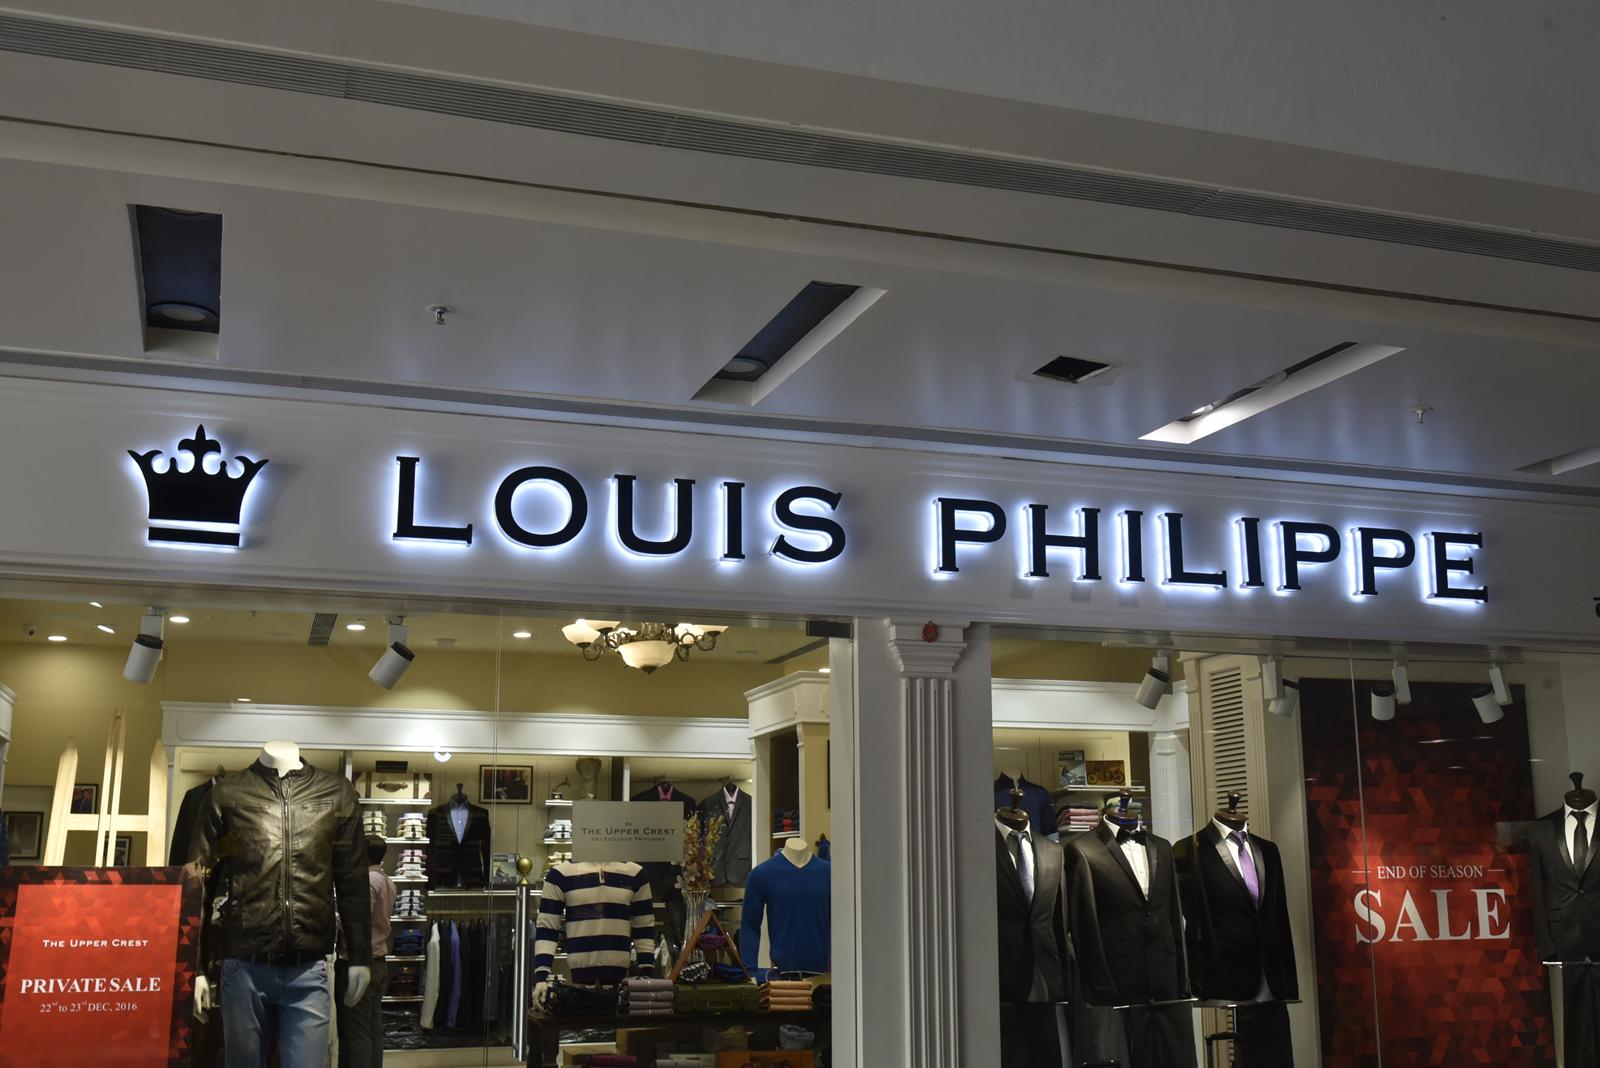 Buy Cream Trousers & Pants for Men by LOUIS PHILIPPE Online | Ajio.com